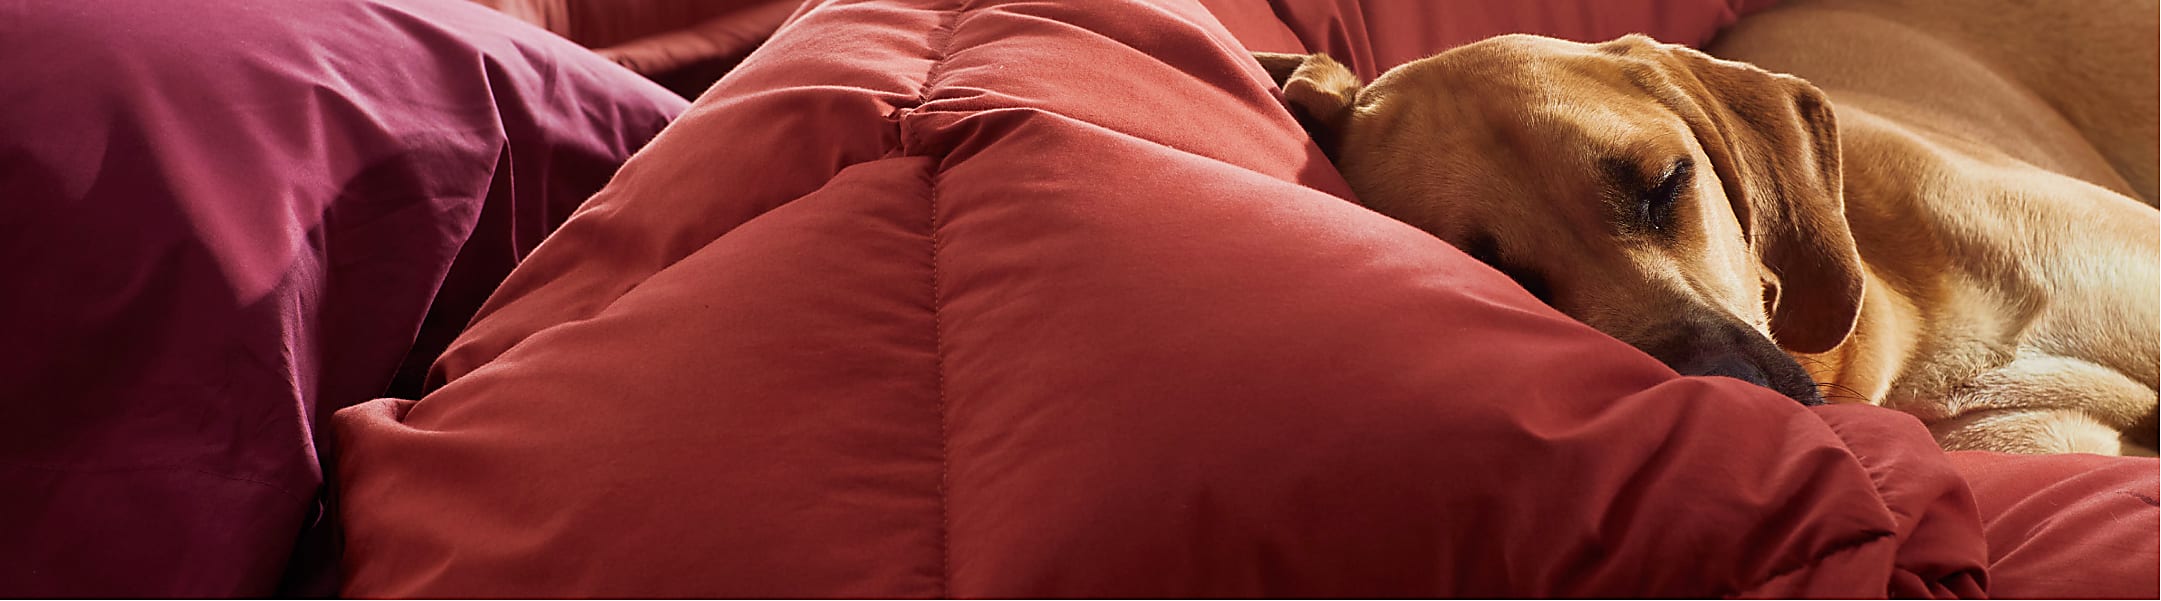 Our Story - red comforter with dog